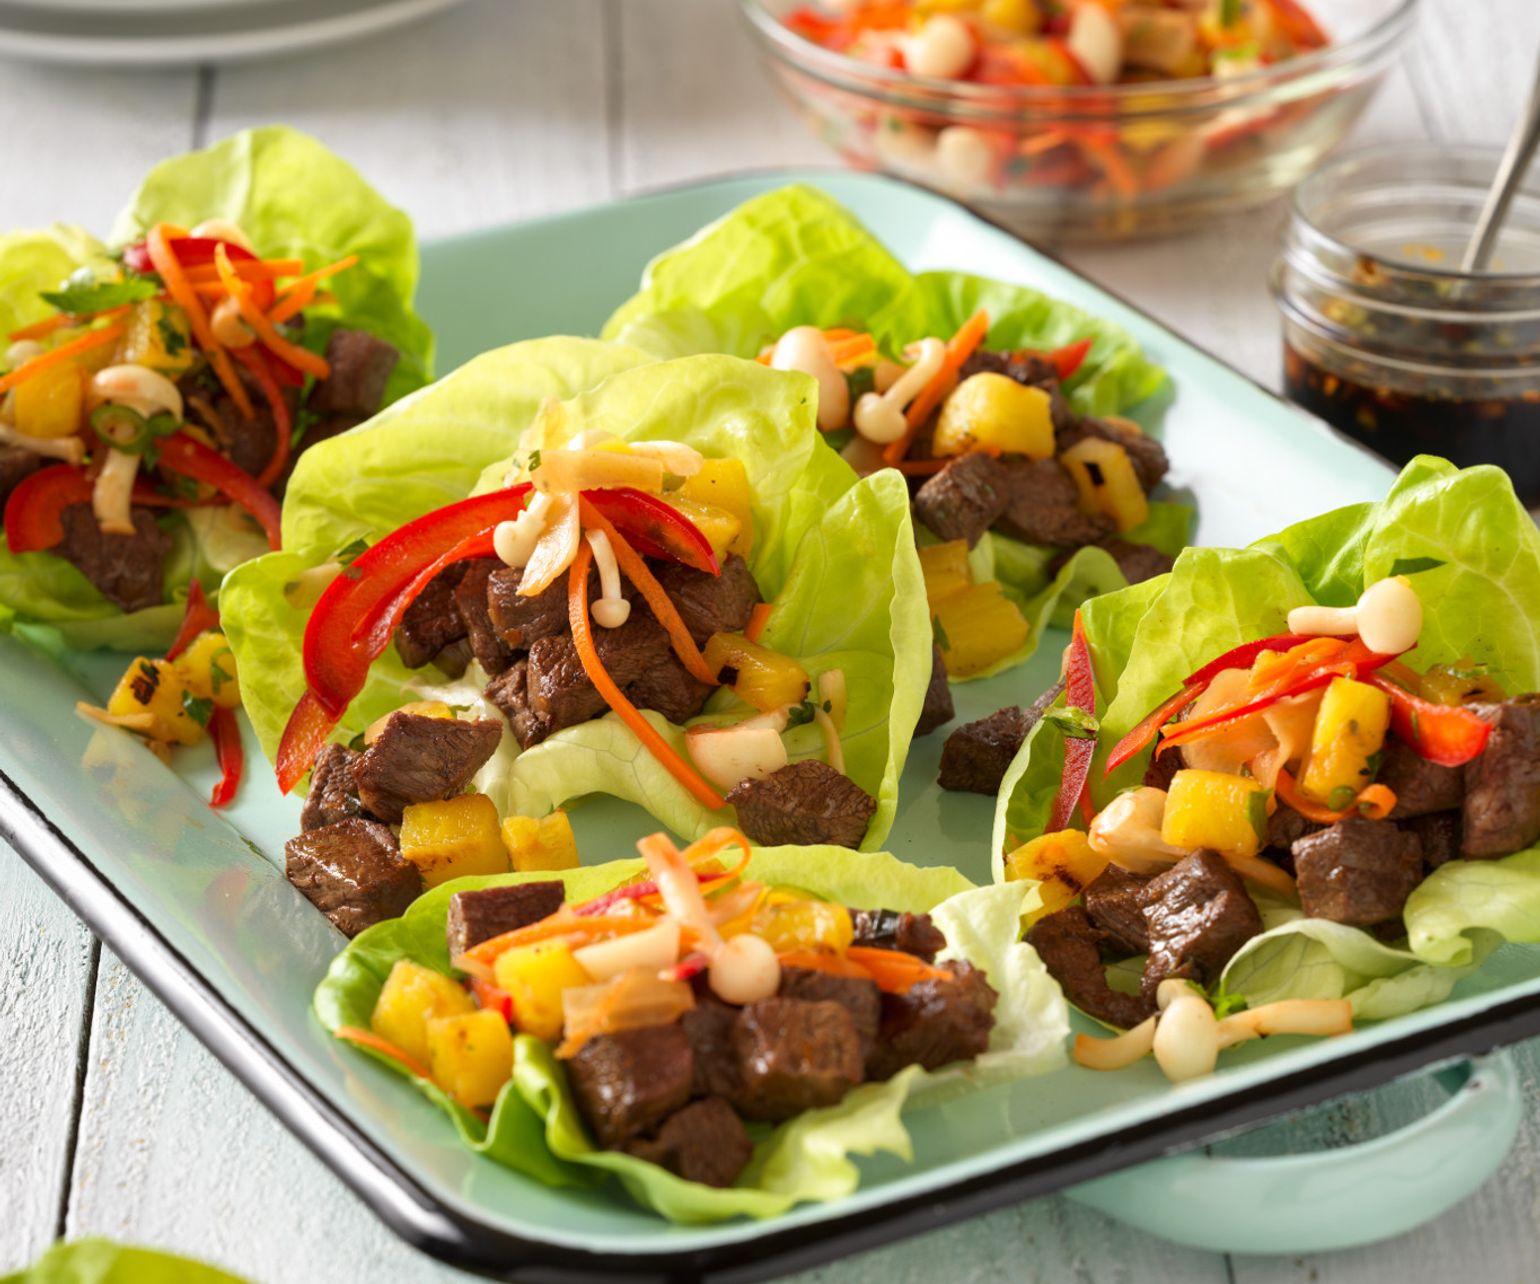 Savory Beef Steak Lettuce Cups with Grilled Pineapple Relish